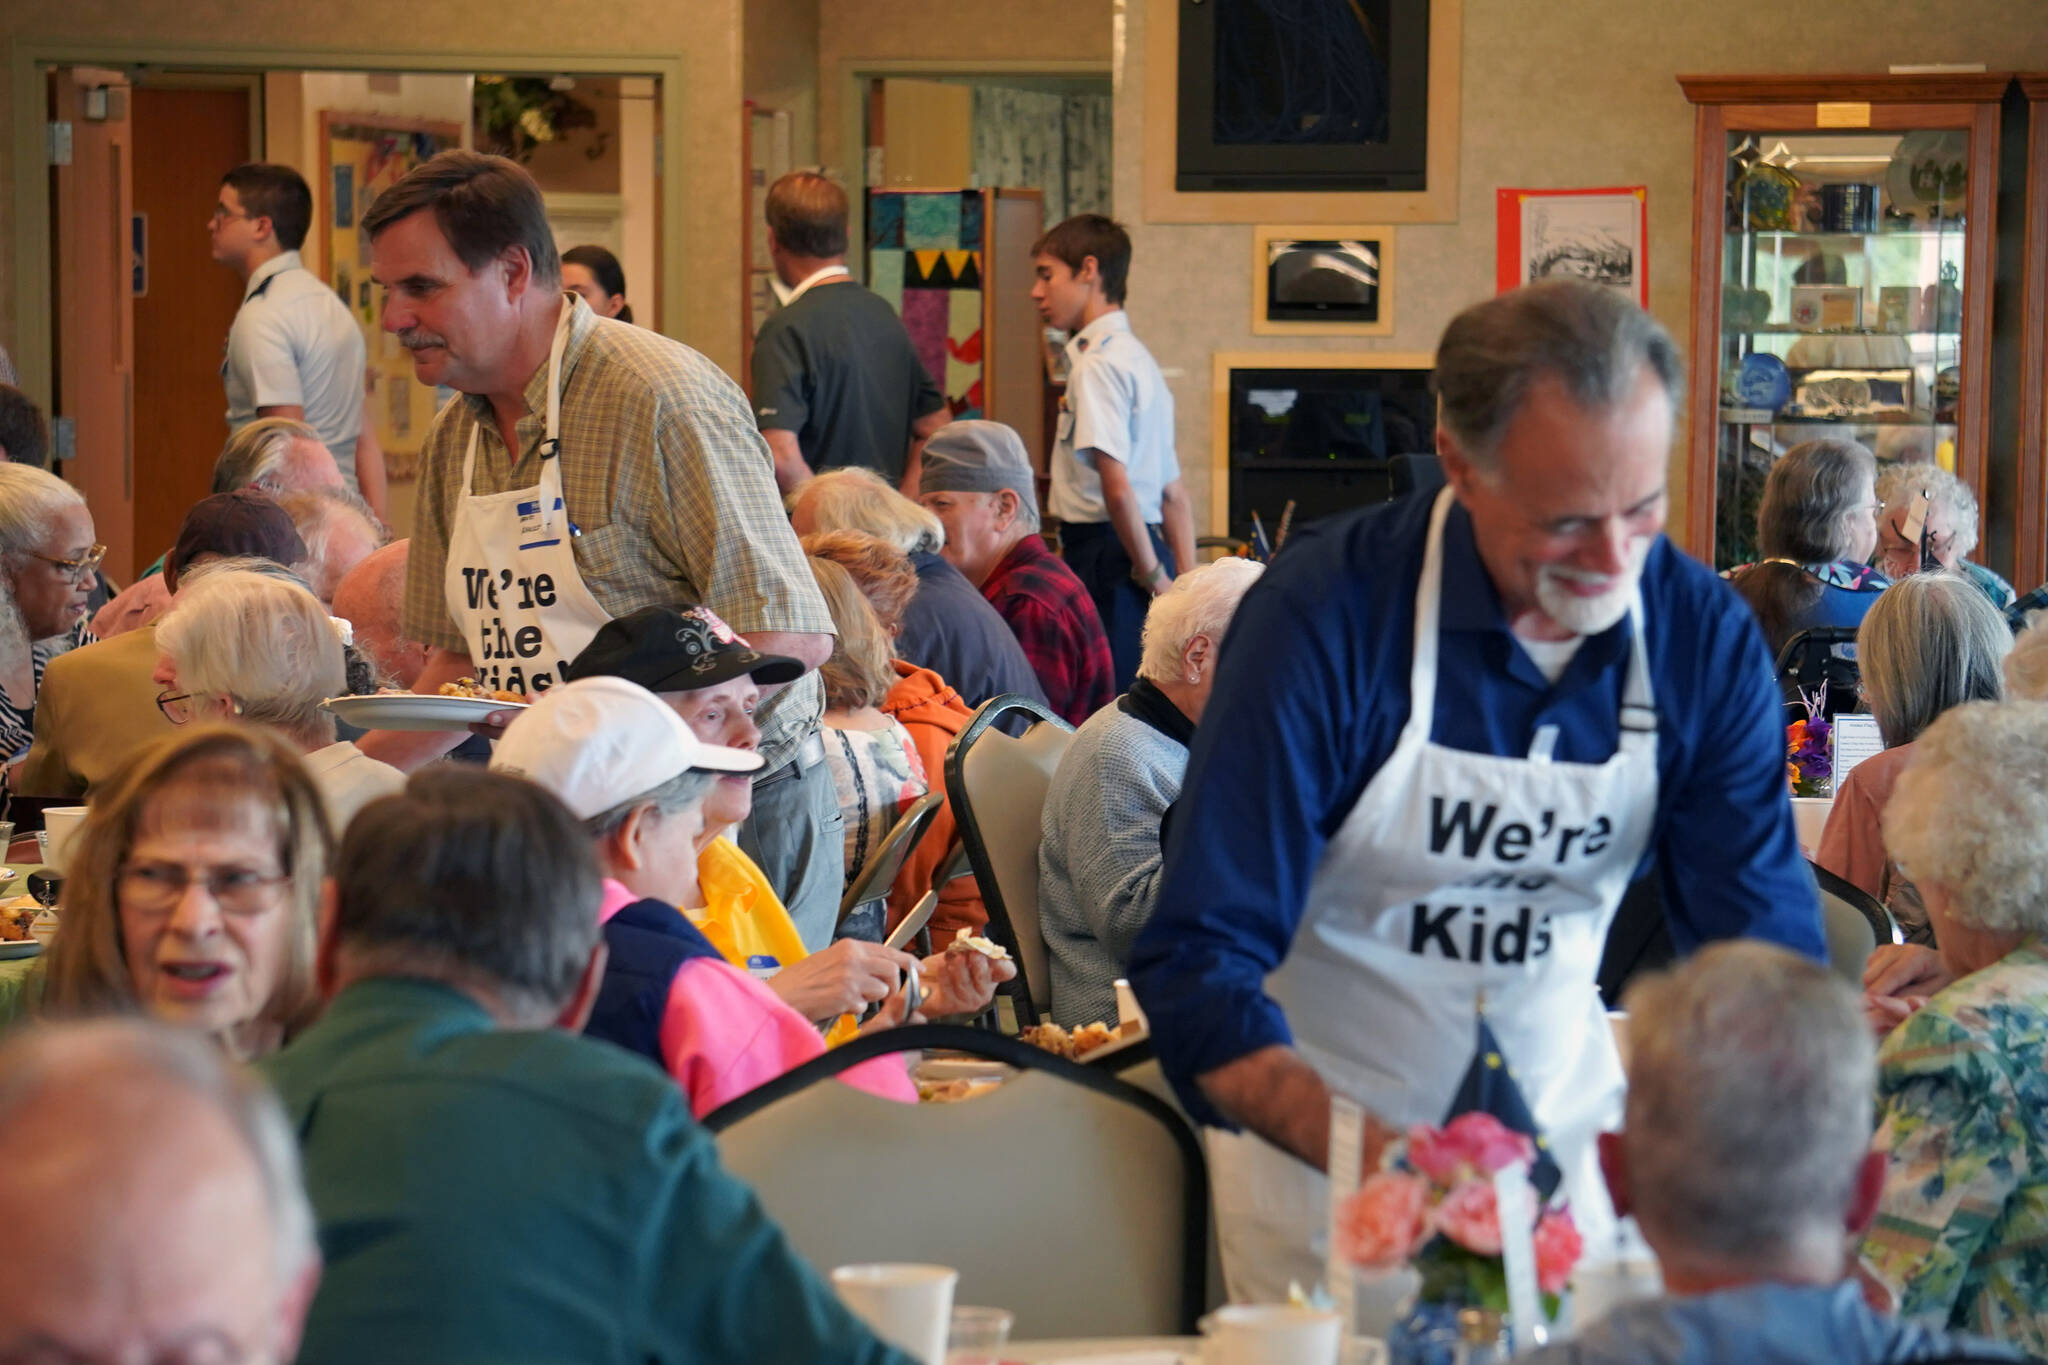 “The Kids” serve lunch to attendees of the Old Timer’s Luncheon at the Kenai Senior Center in Kenai, Alaska, on Thursday, Aug. 31, 2023. (Jake Dye/Peninsula Clarion)